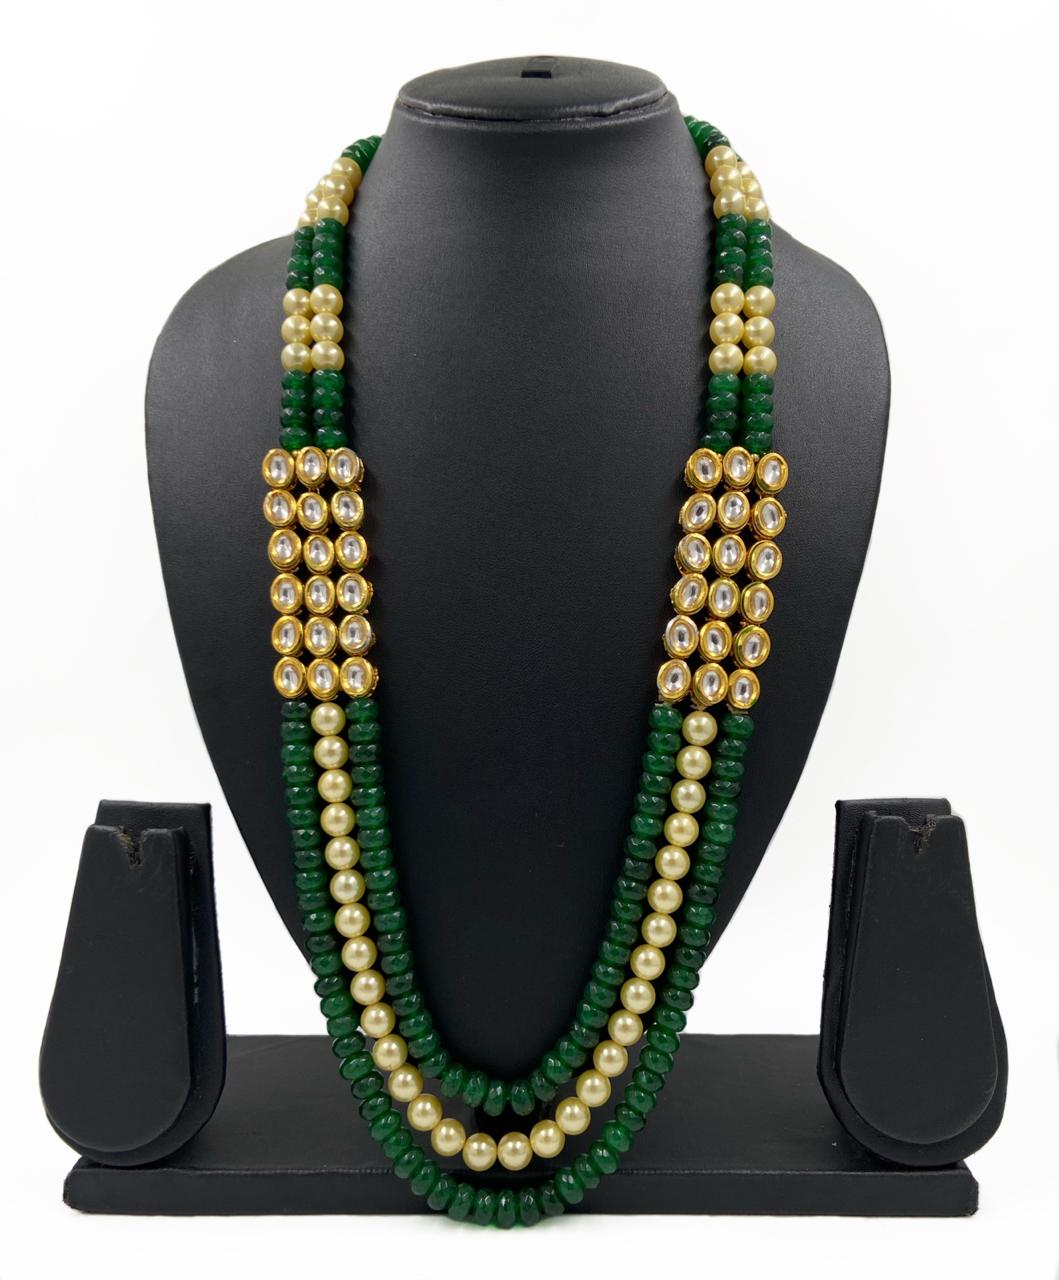 Triple Layered Semi Precious Green Jade And Pearl Beaded Necklace For Men. Beads Jewellery